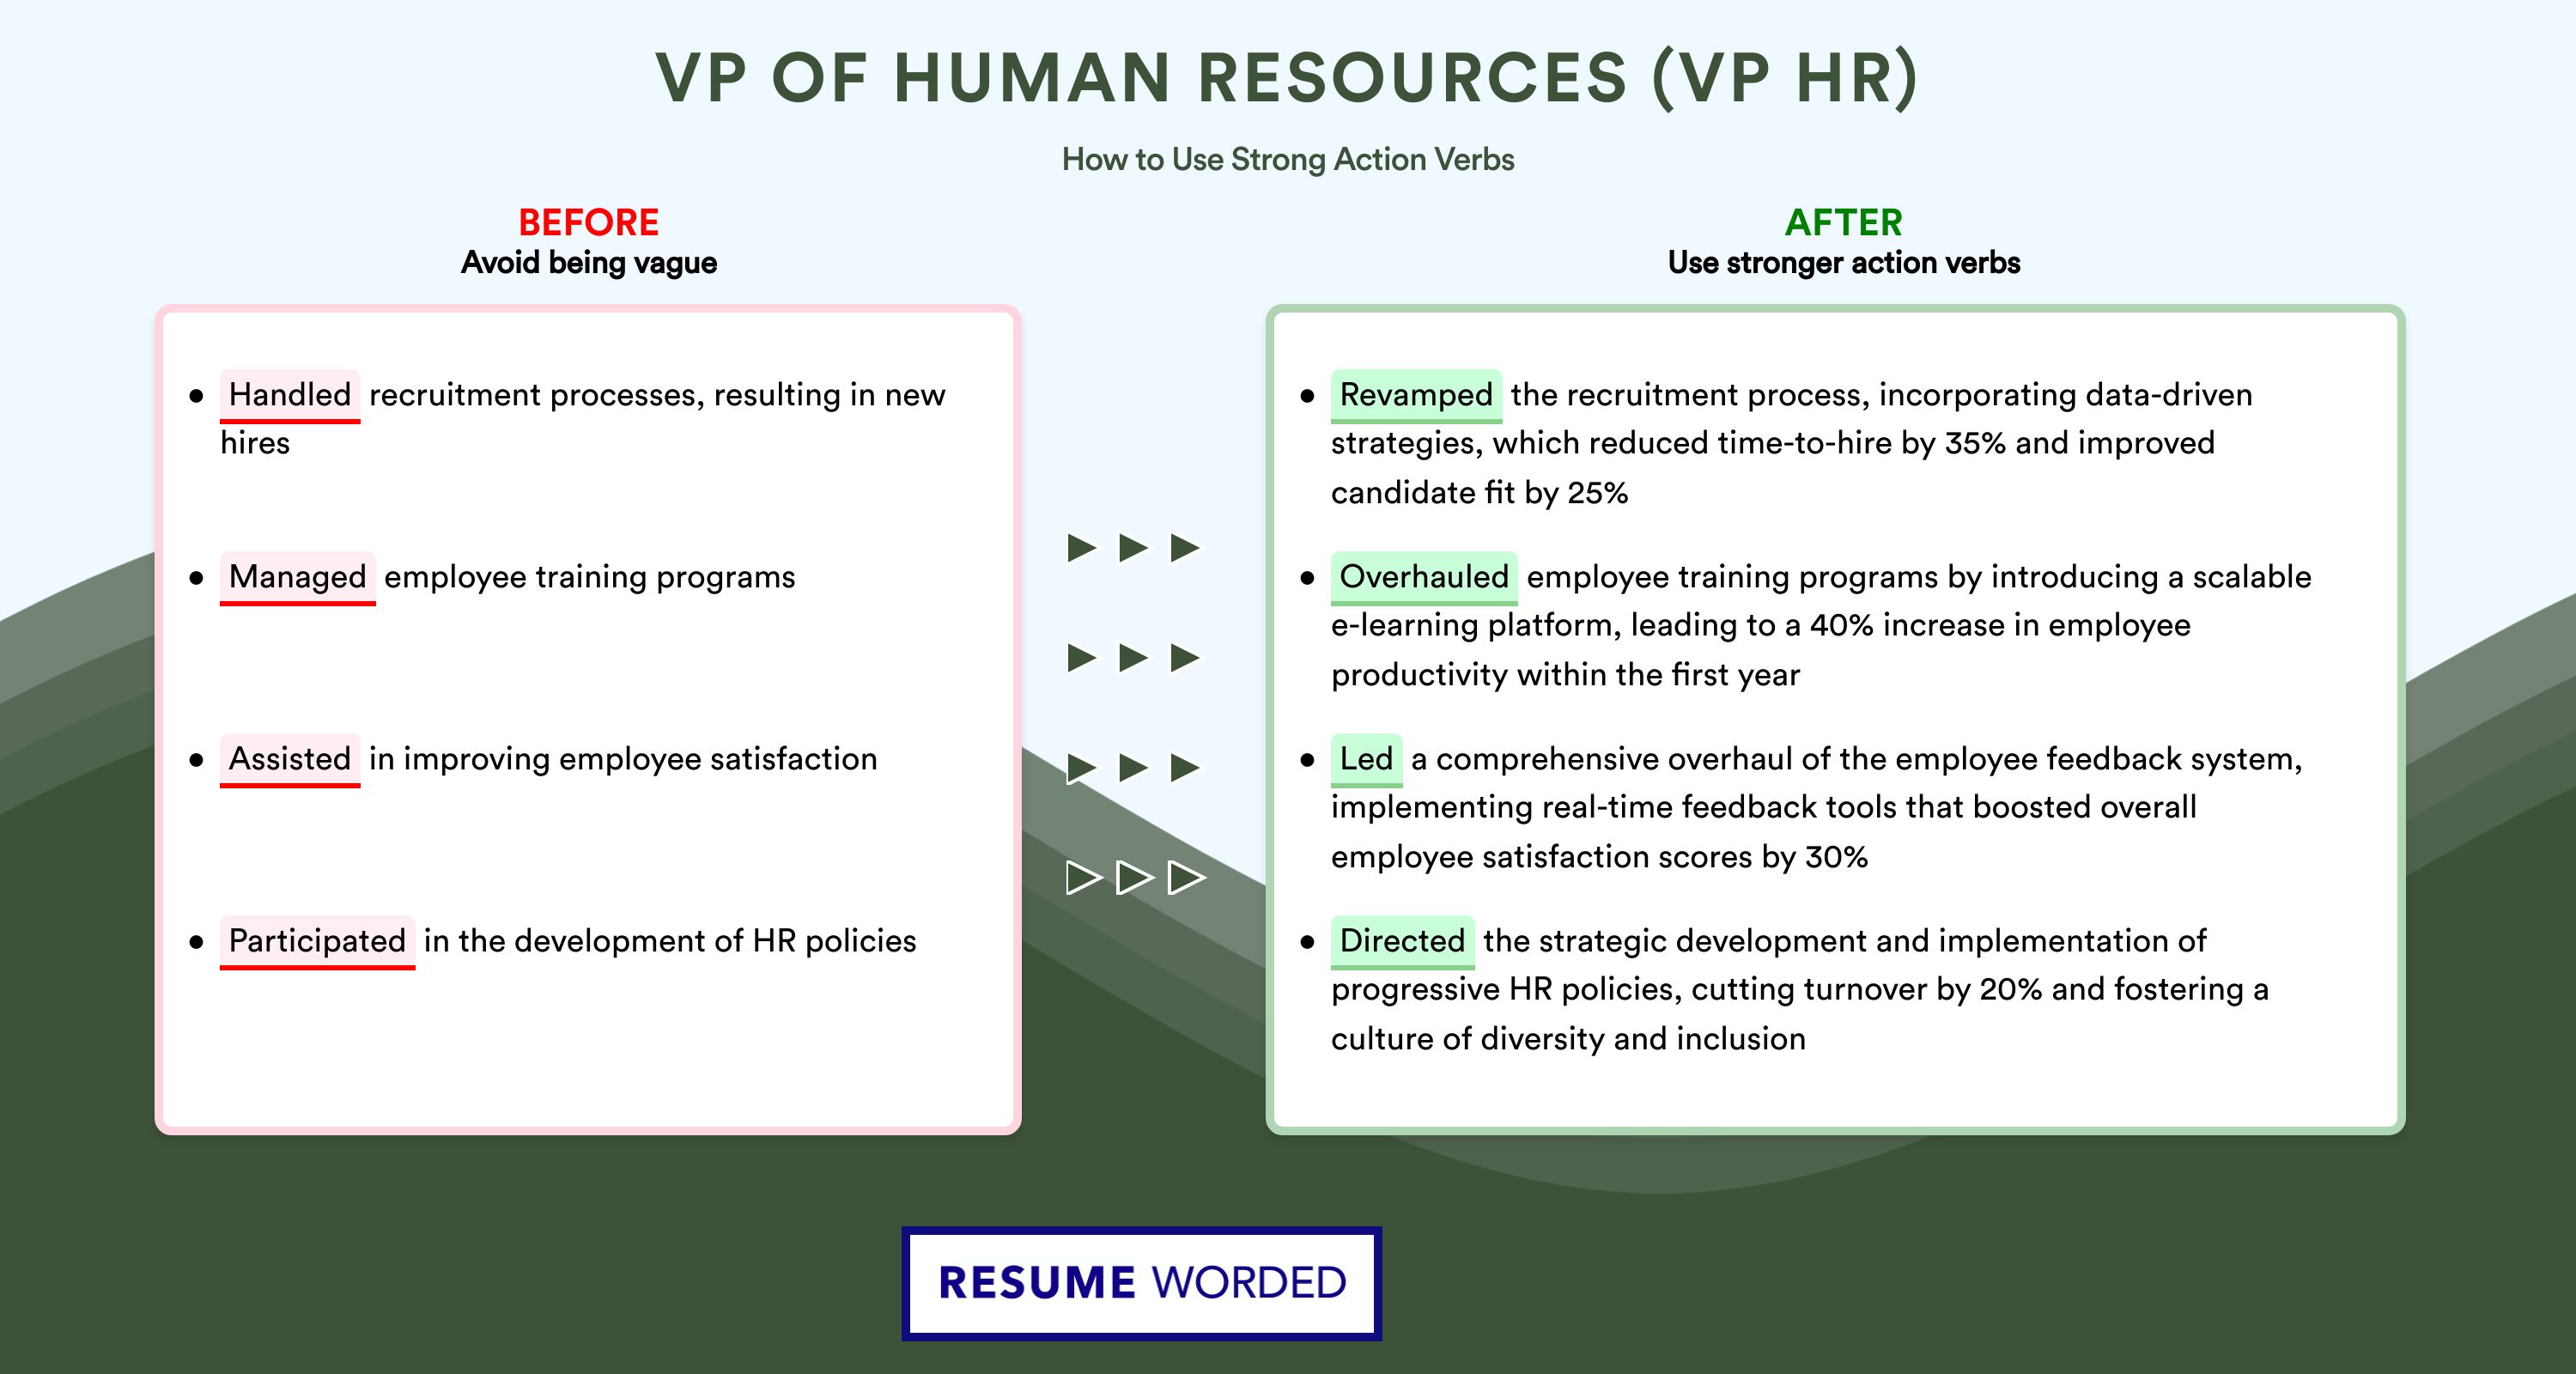 Action Verbs for VP of Human Resources (VP HR)